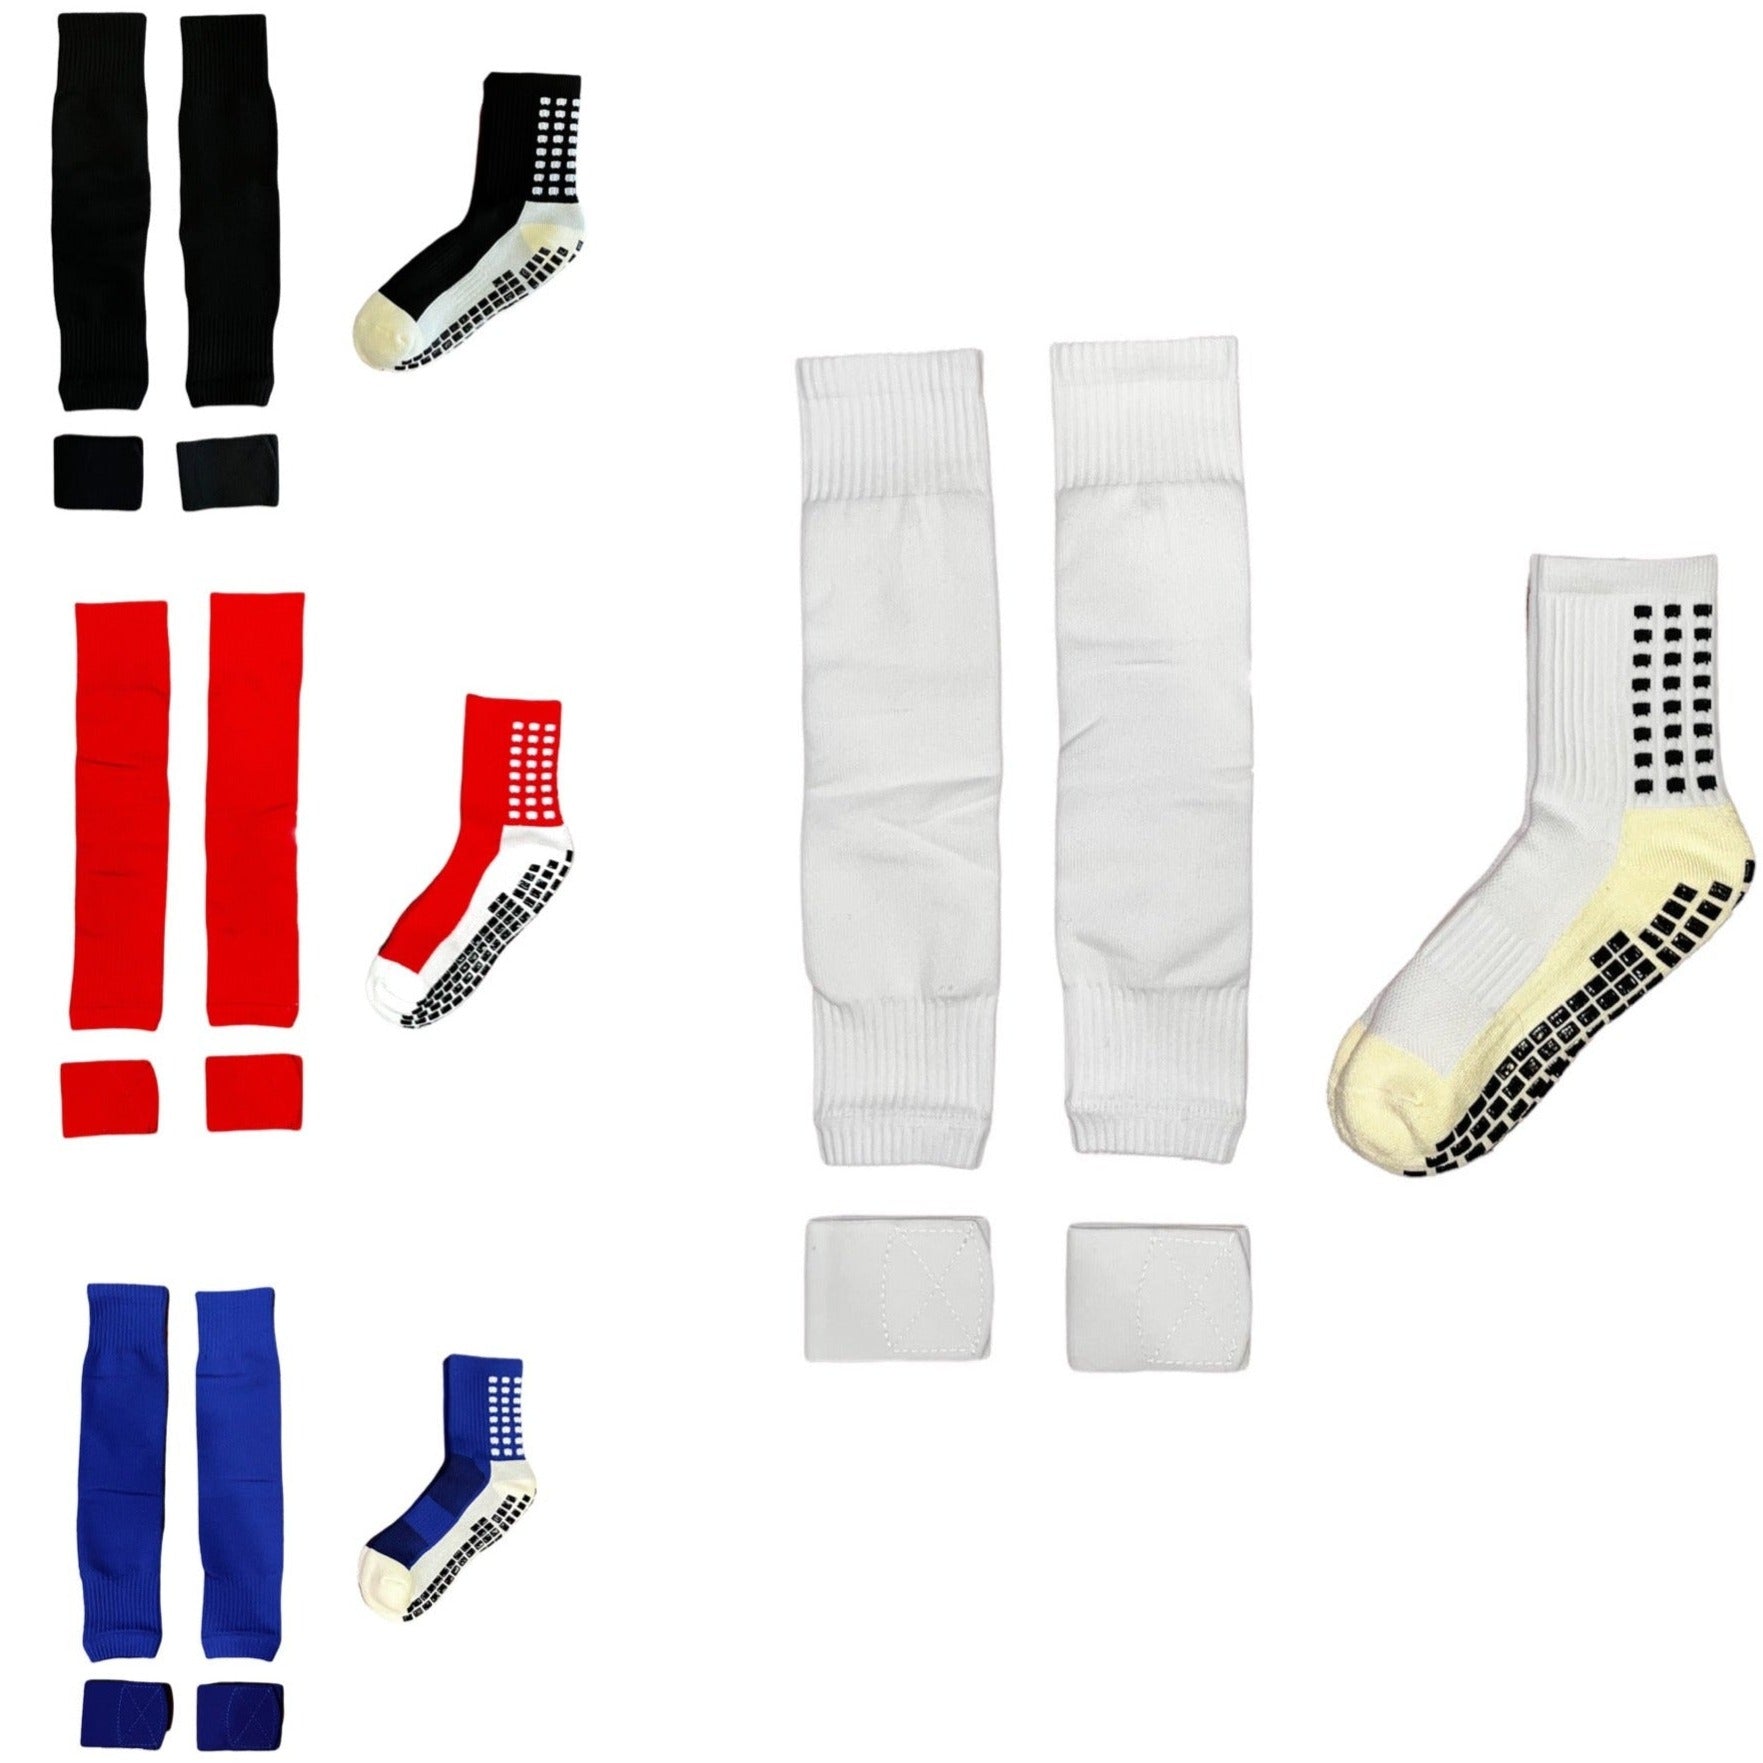 PURE GRIP SOCKS - Sports Contact